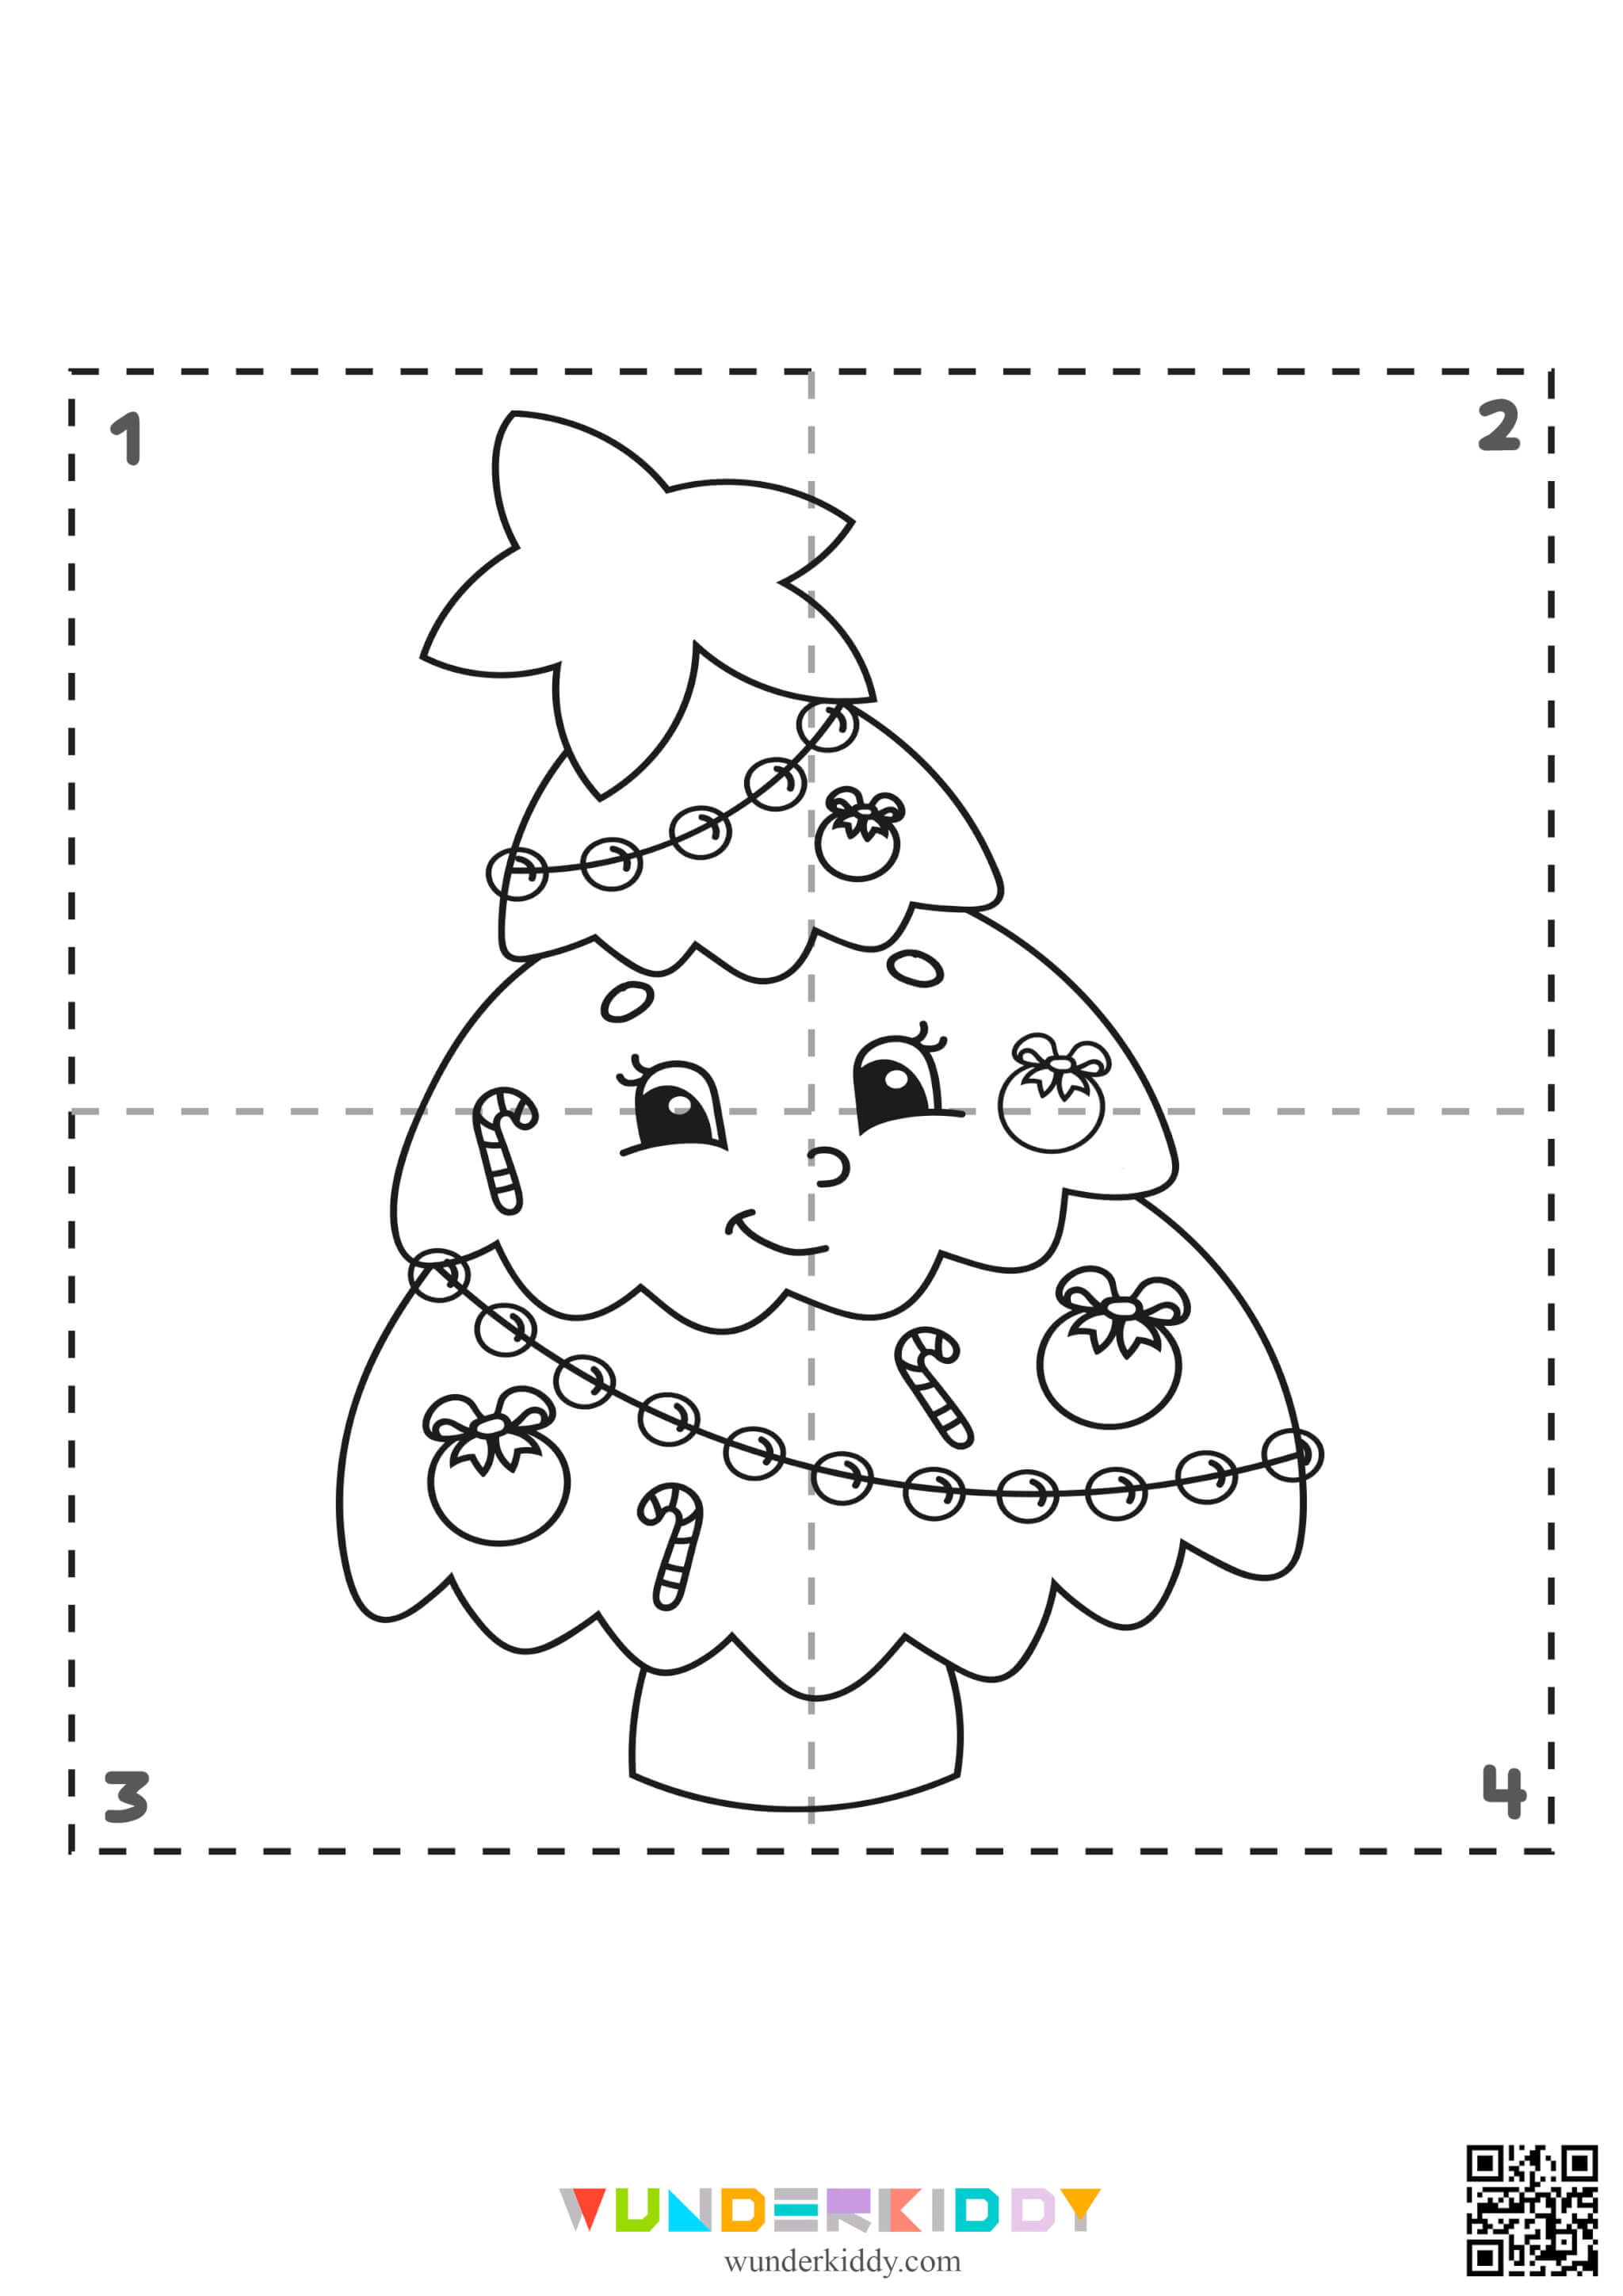 Coloring pages «New Year's Puzzle» - Image 4